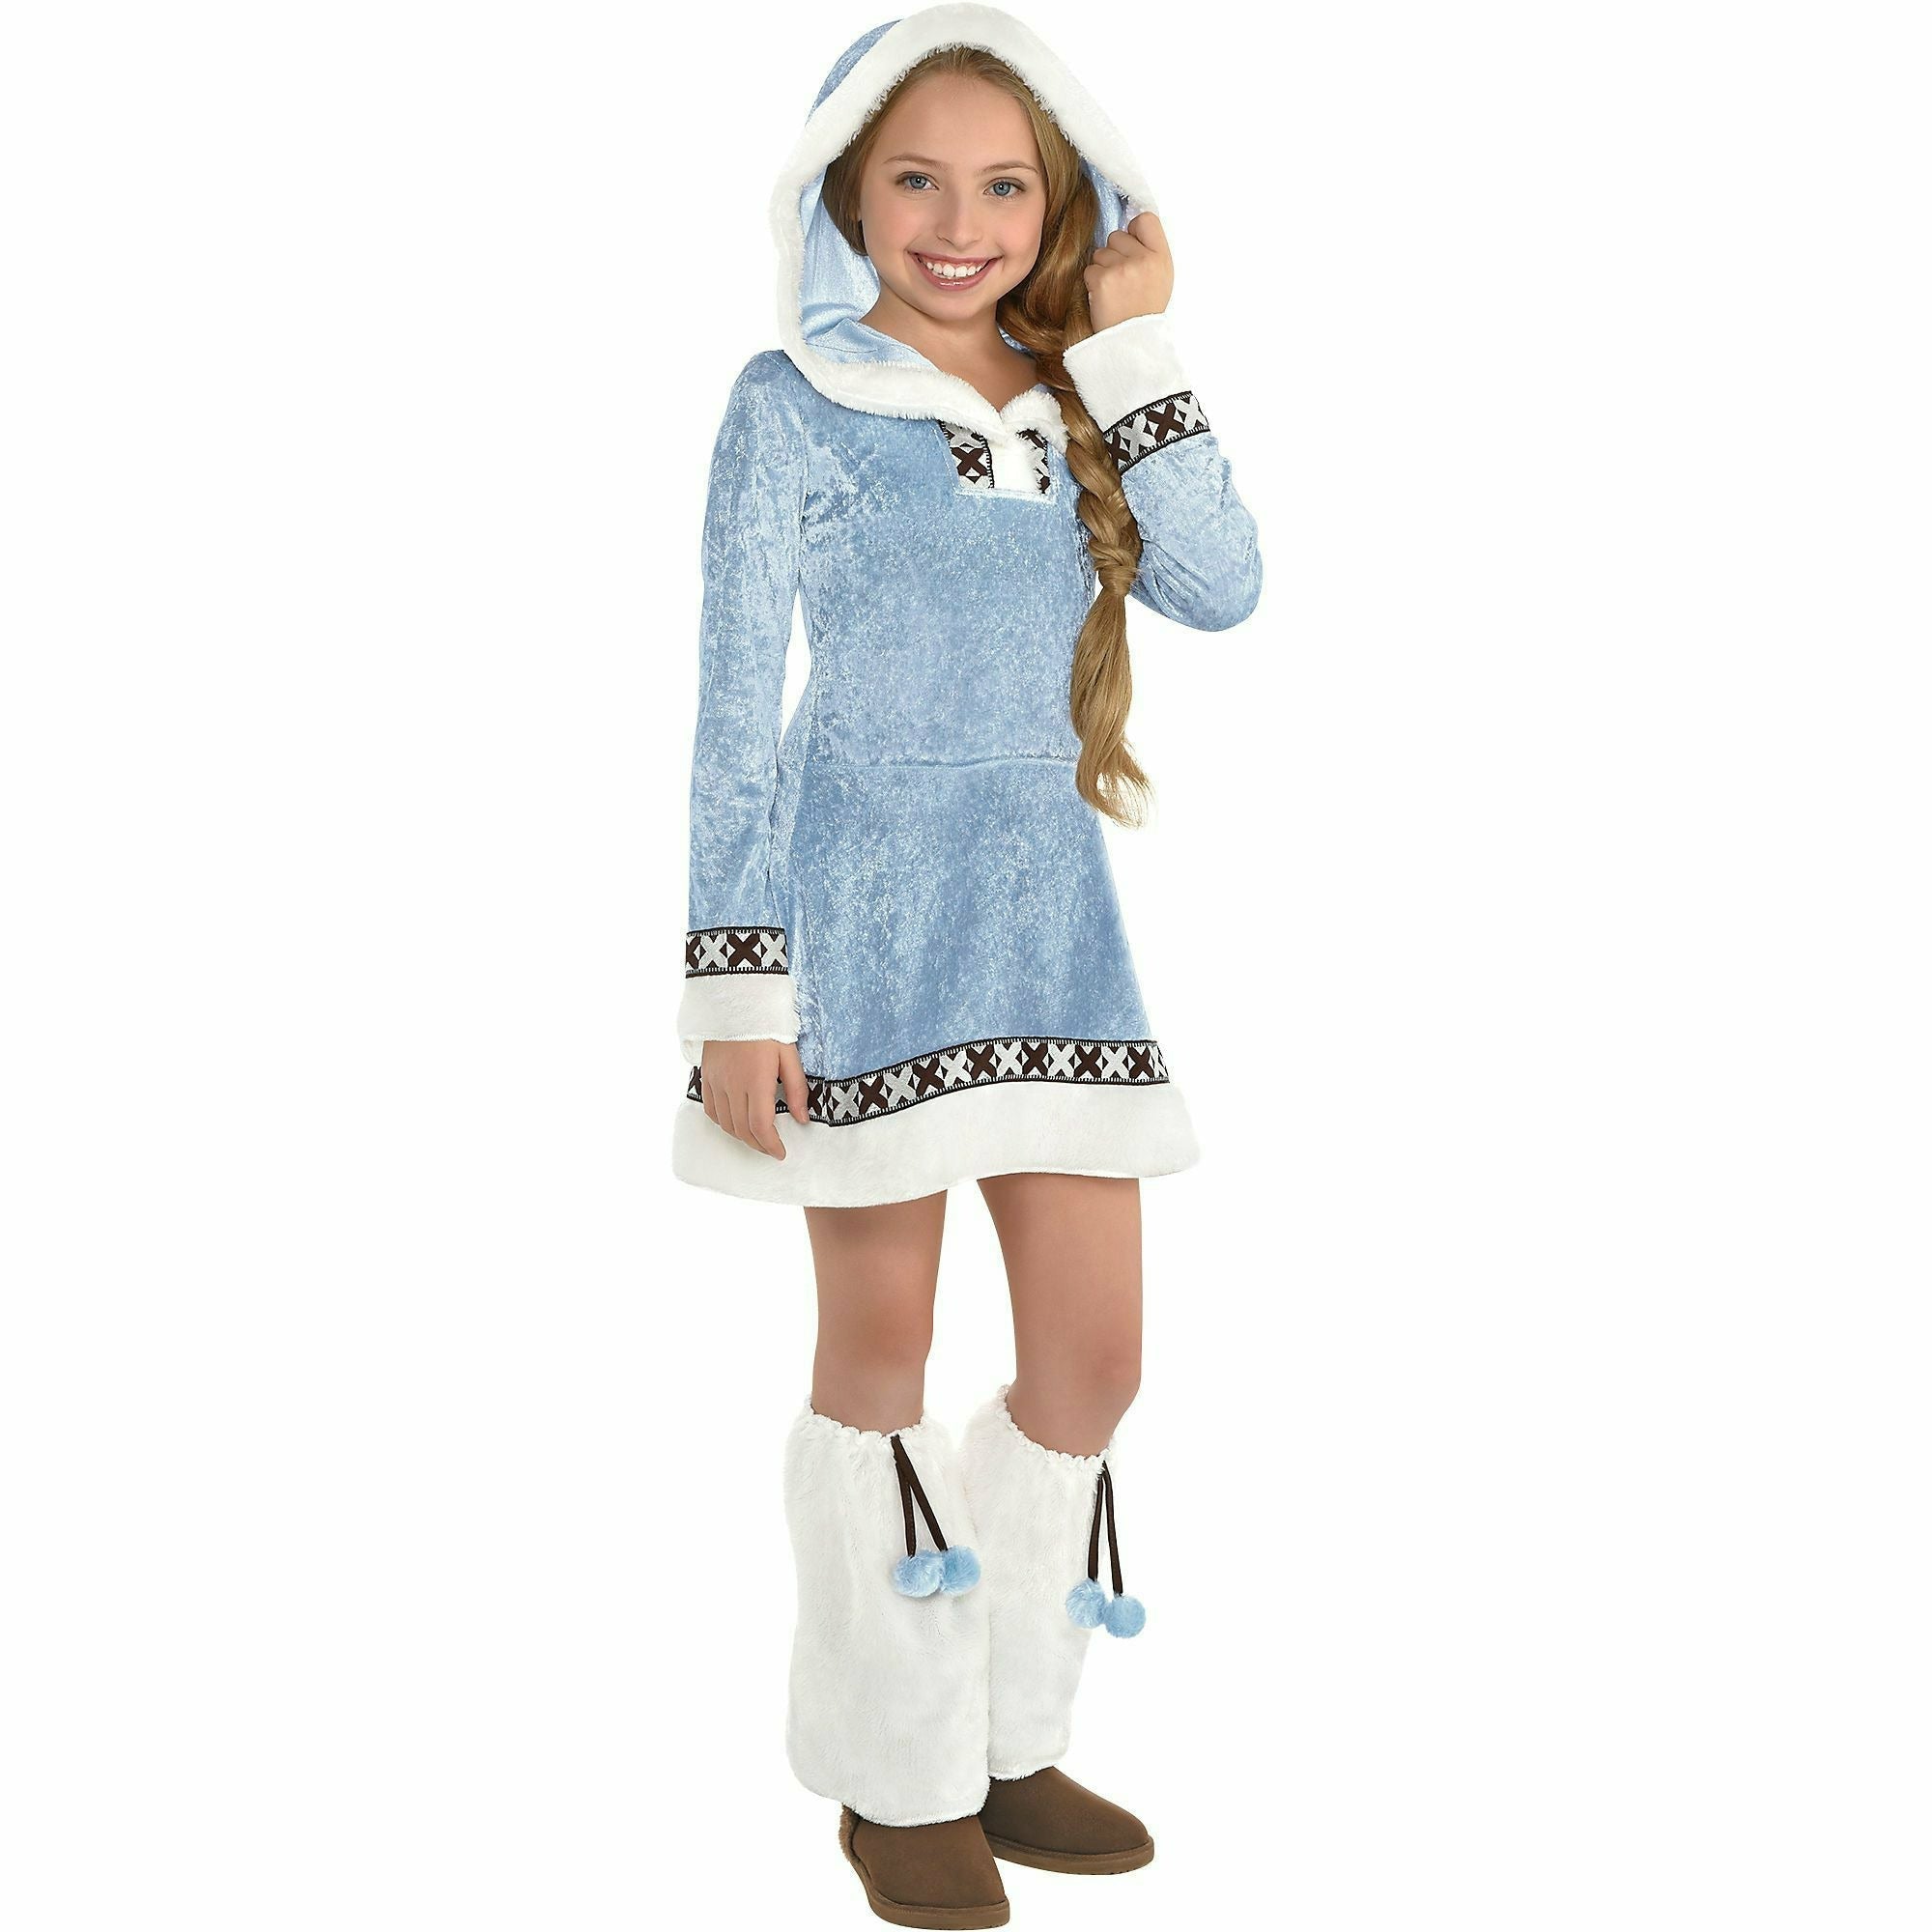 COSTUMES USA COSTUMES Toddler 3-4 T Girls Artic Princess Costume